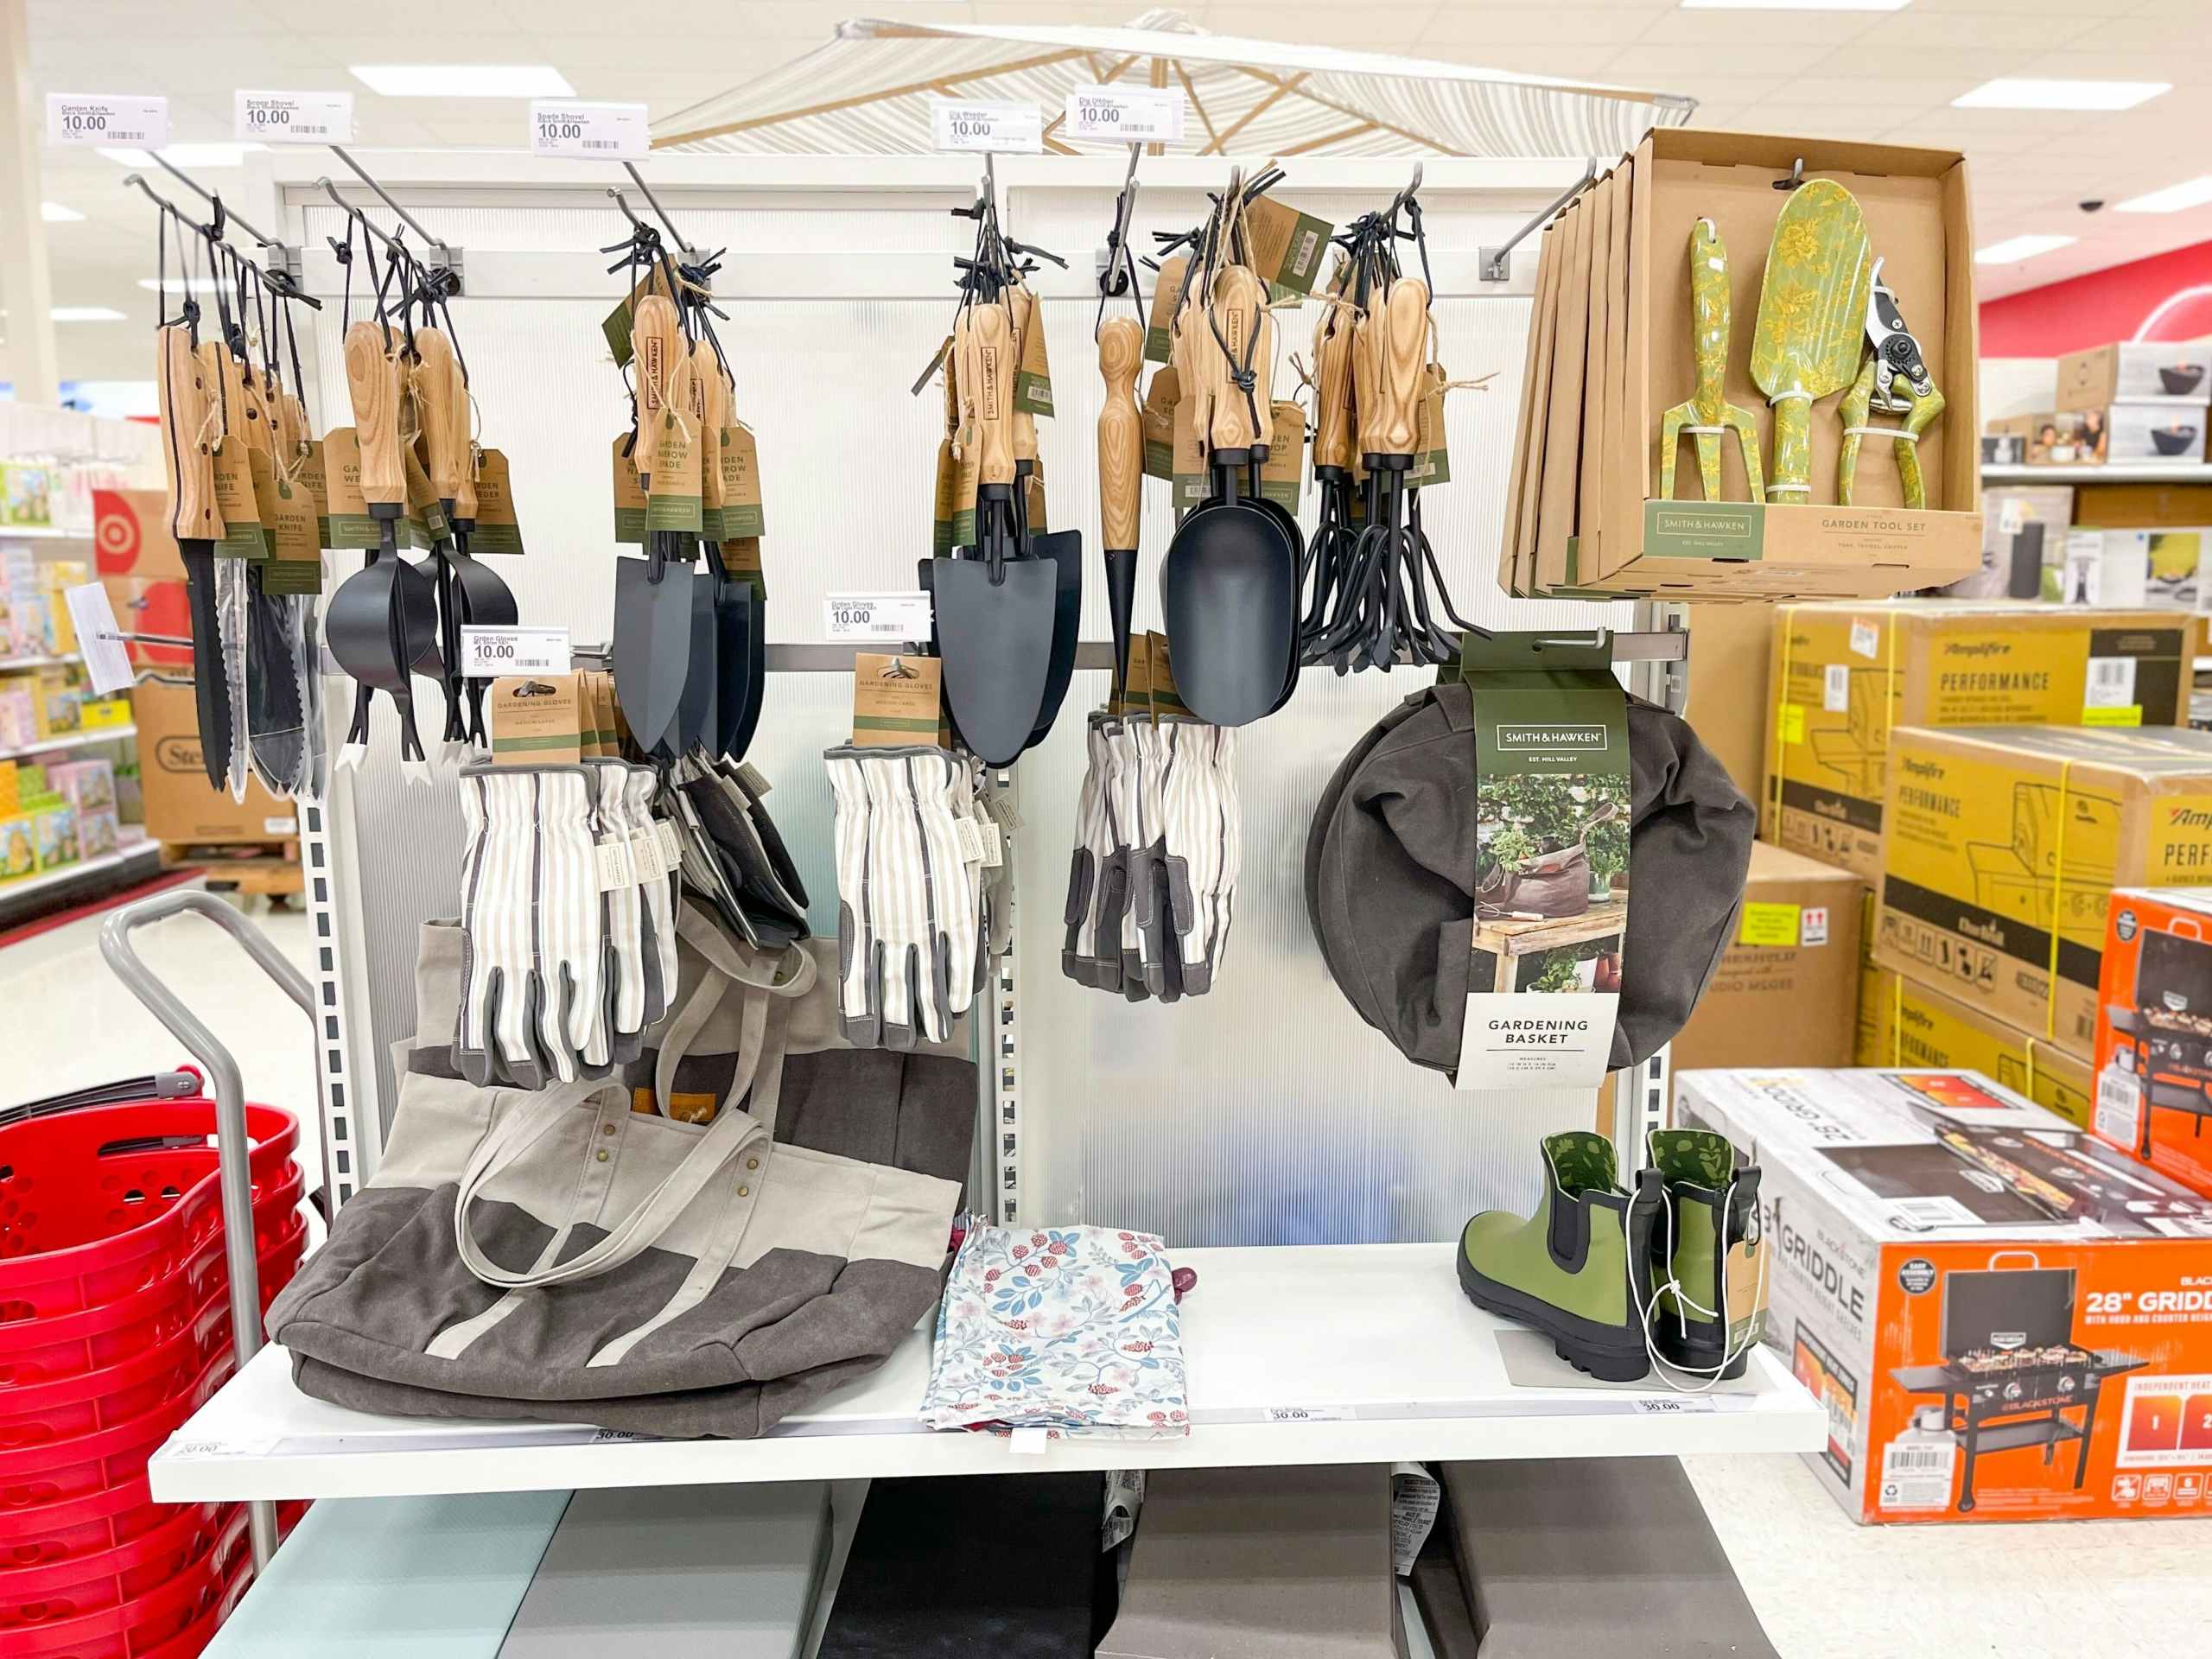 A variety of outdoor tools hanging from store racks and sitting on the store shelves.